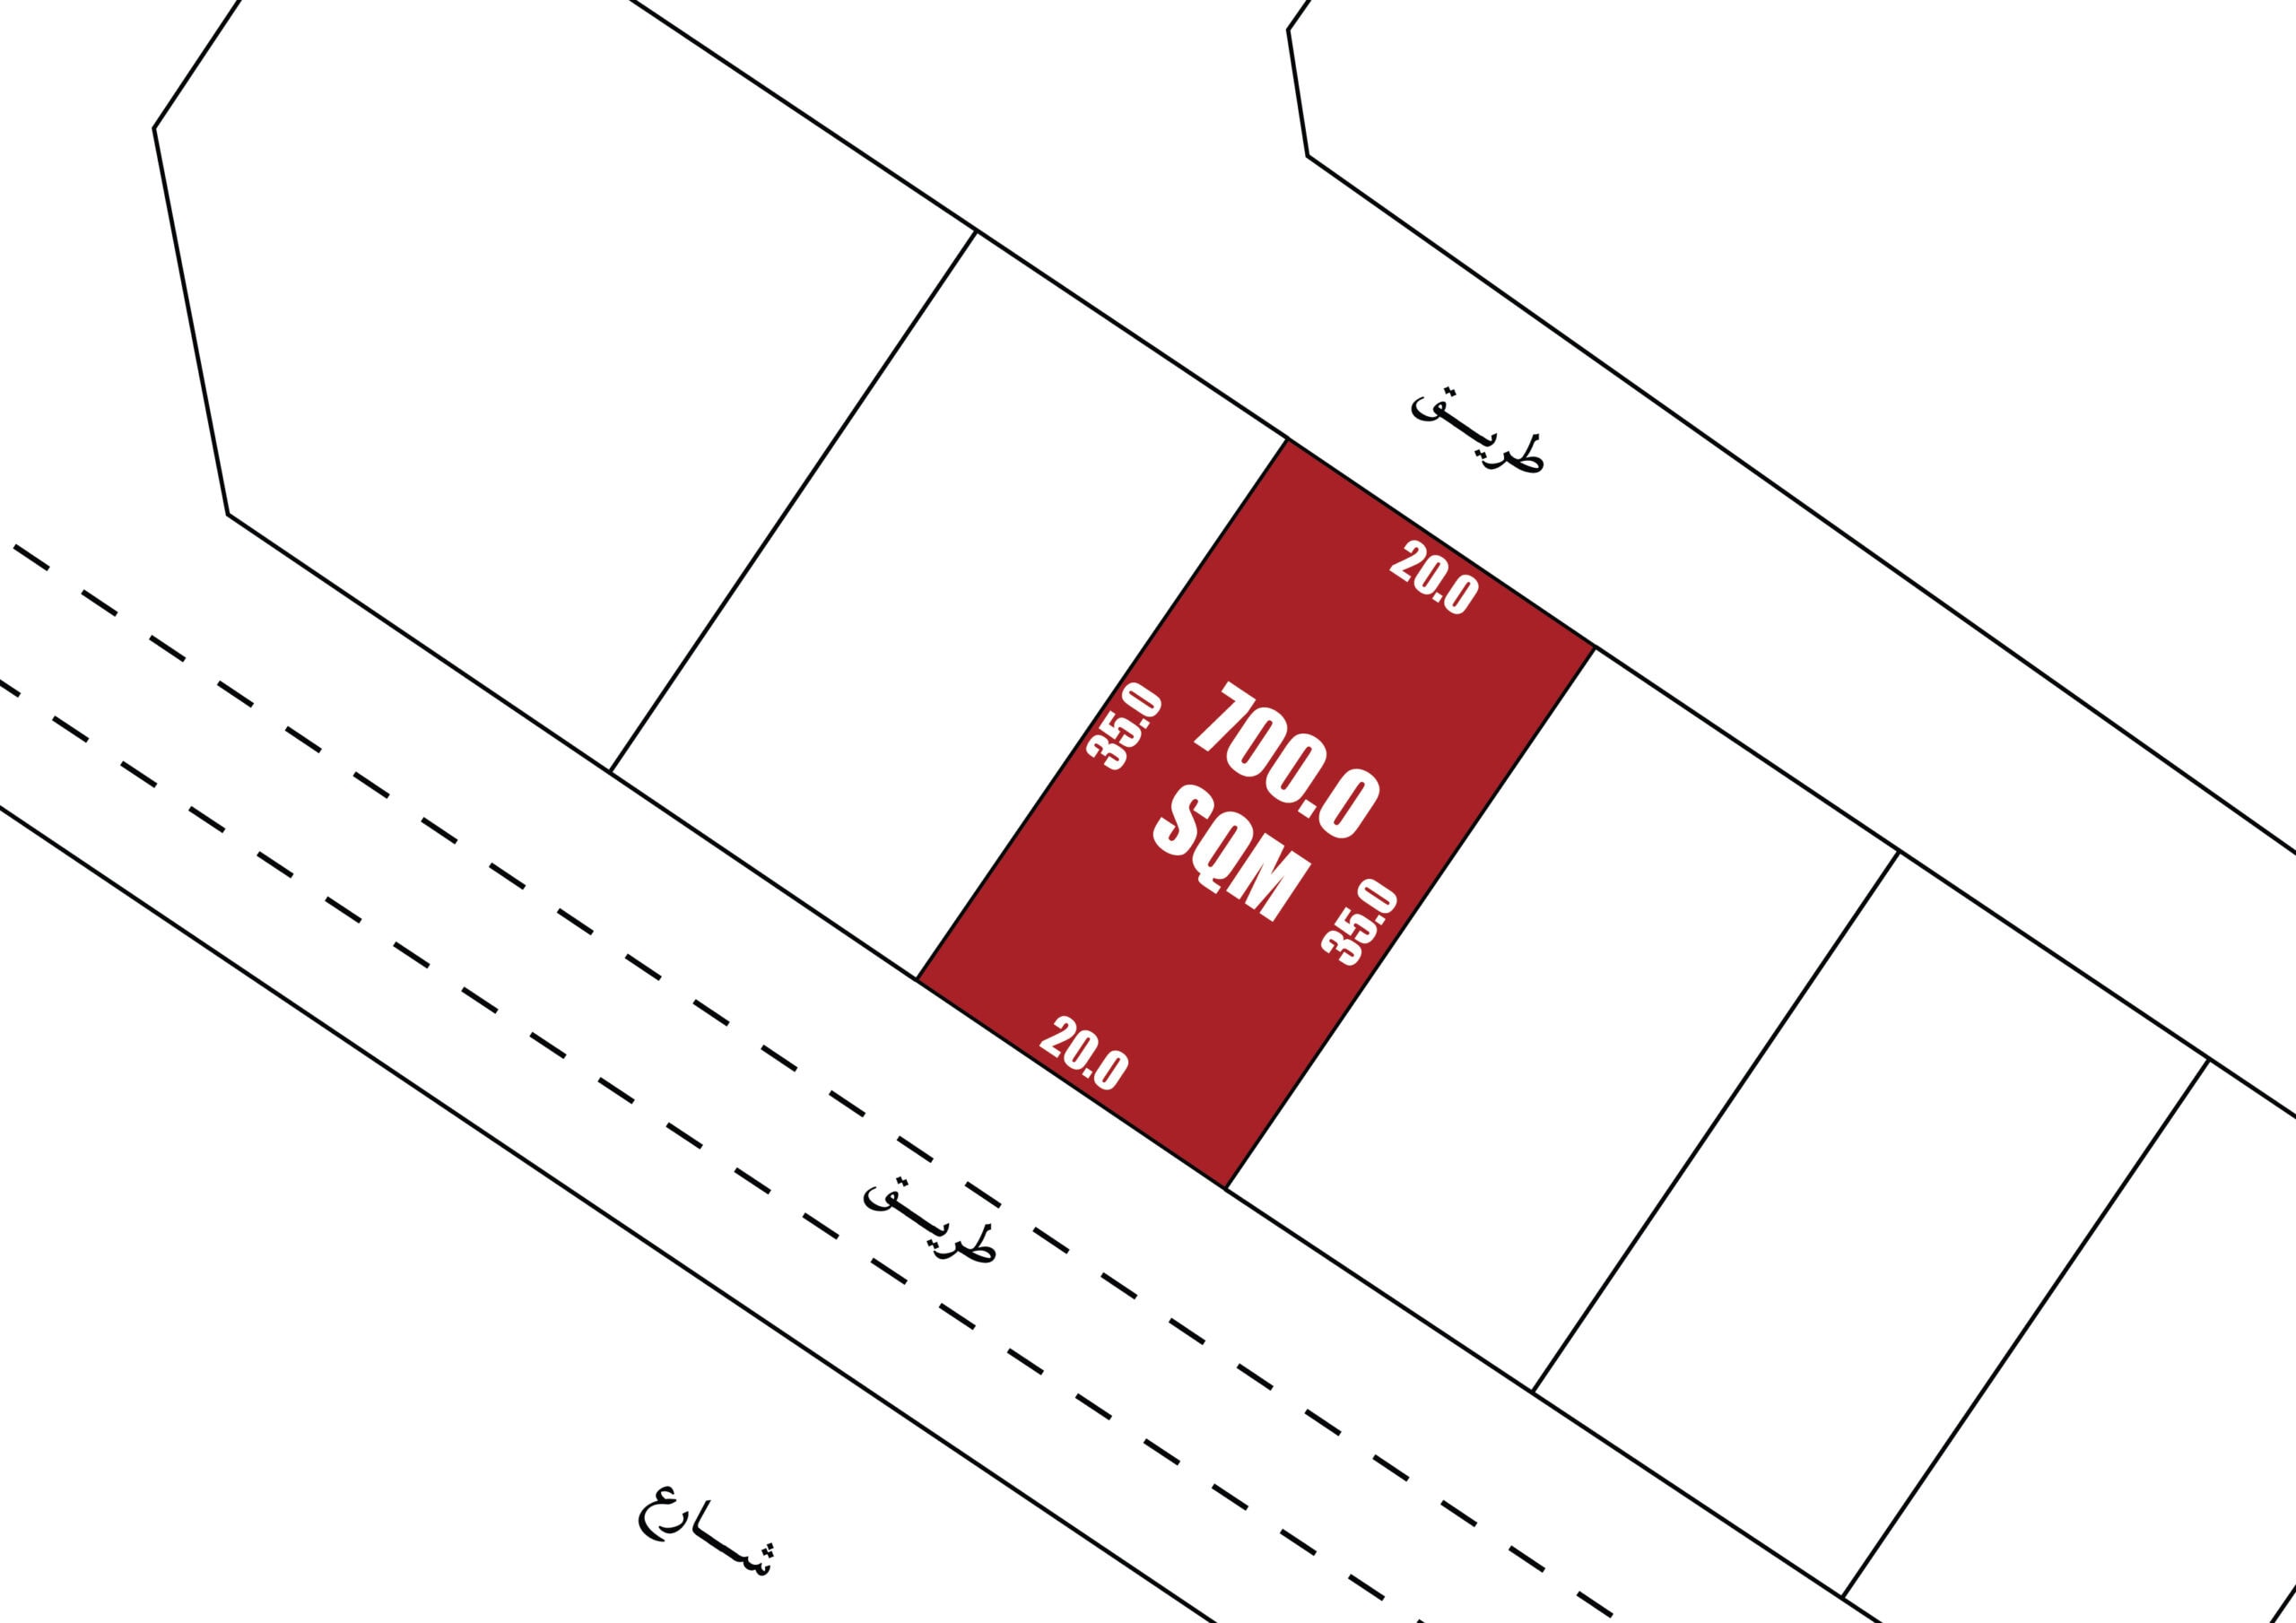 A schematic Auto Draft of a property plot with dimensions labeled in Arabic, highlighting a 700 sqm area in red.